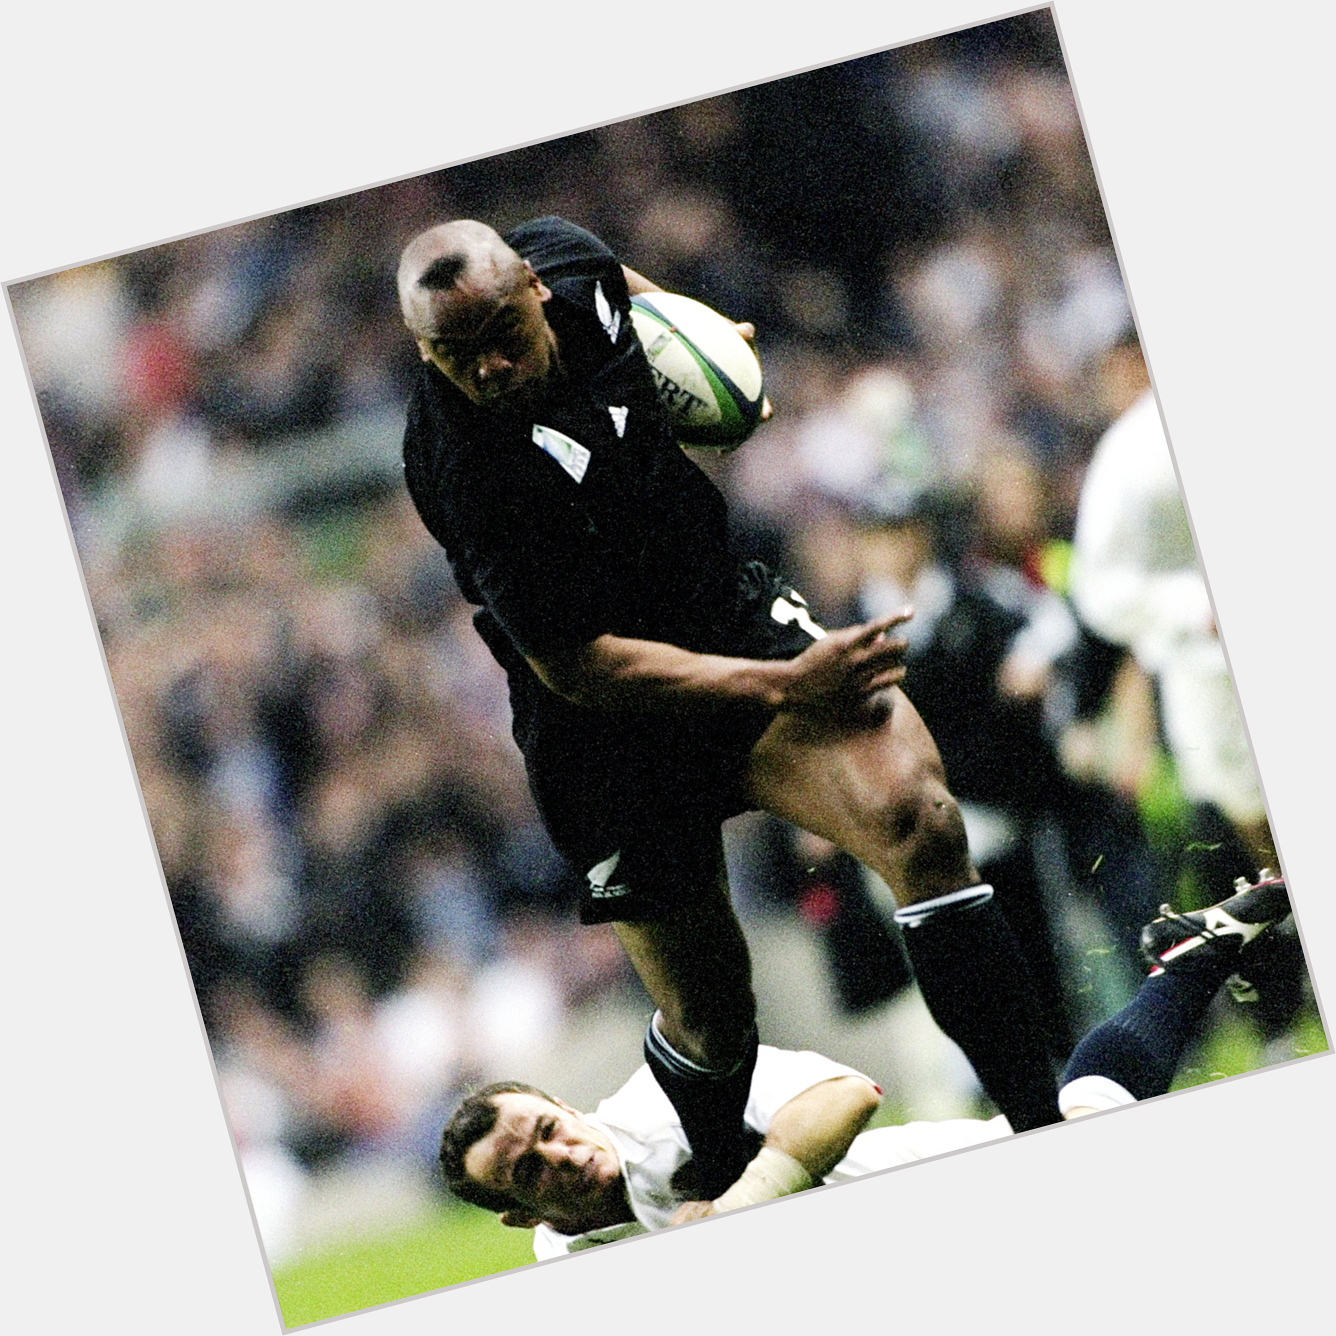 Happy Birthday to the GOAT Jonah Lomu would have been 45 today. Forever missed. 